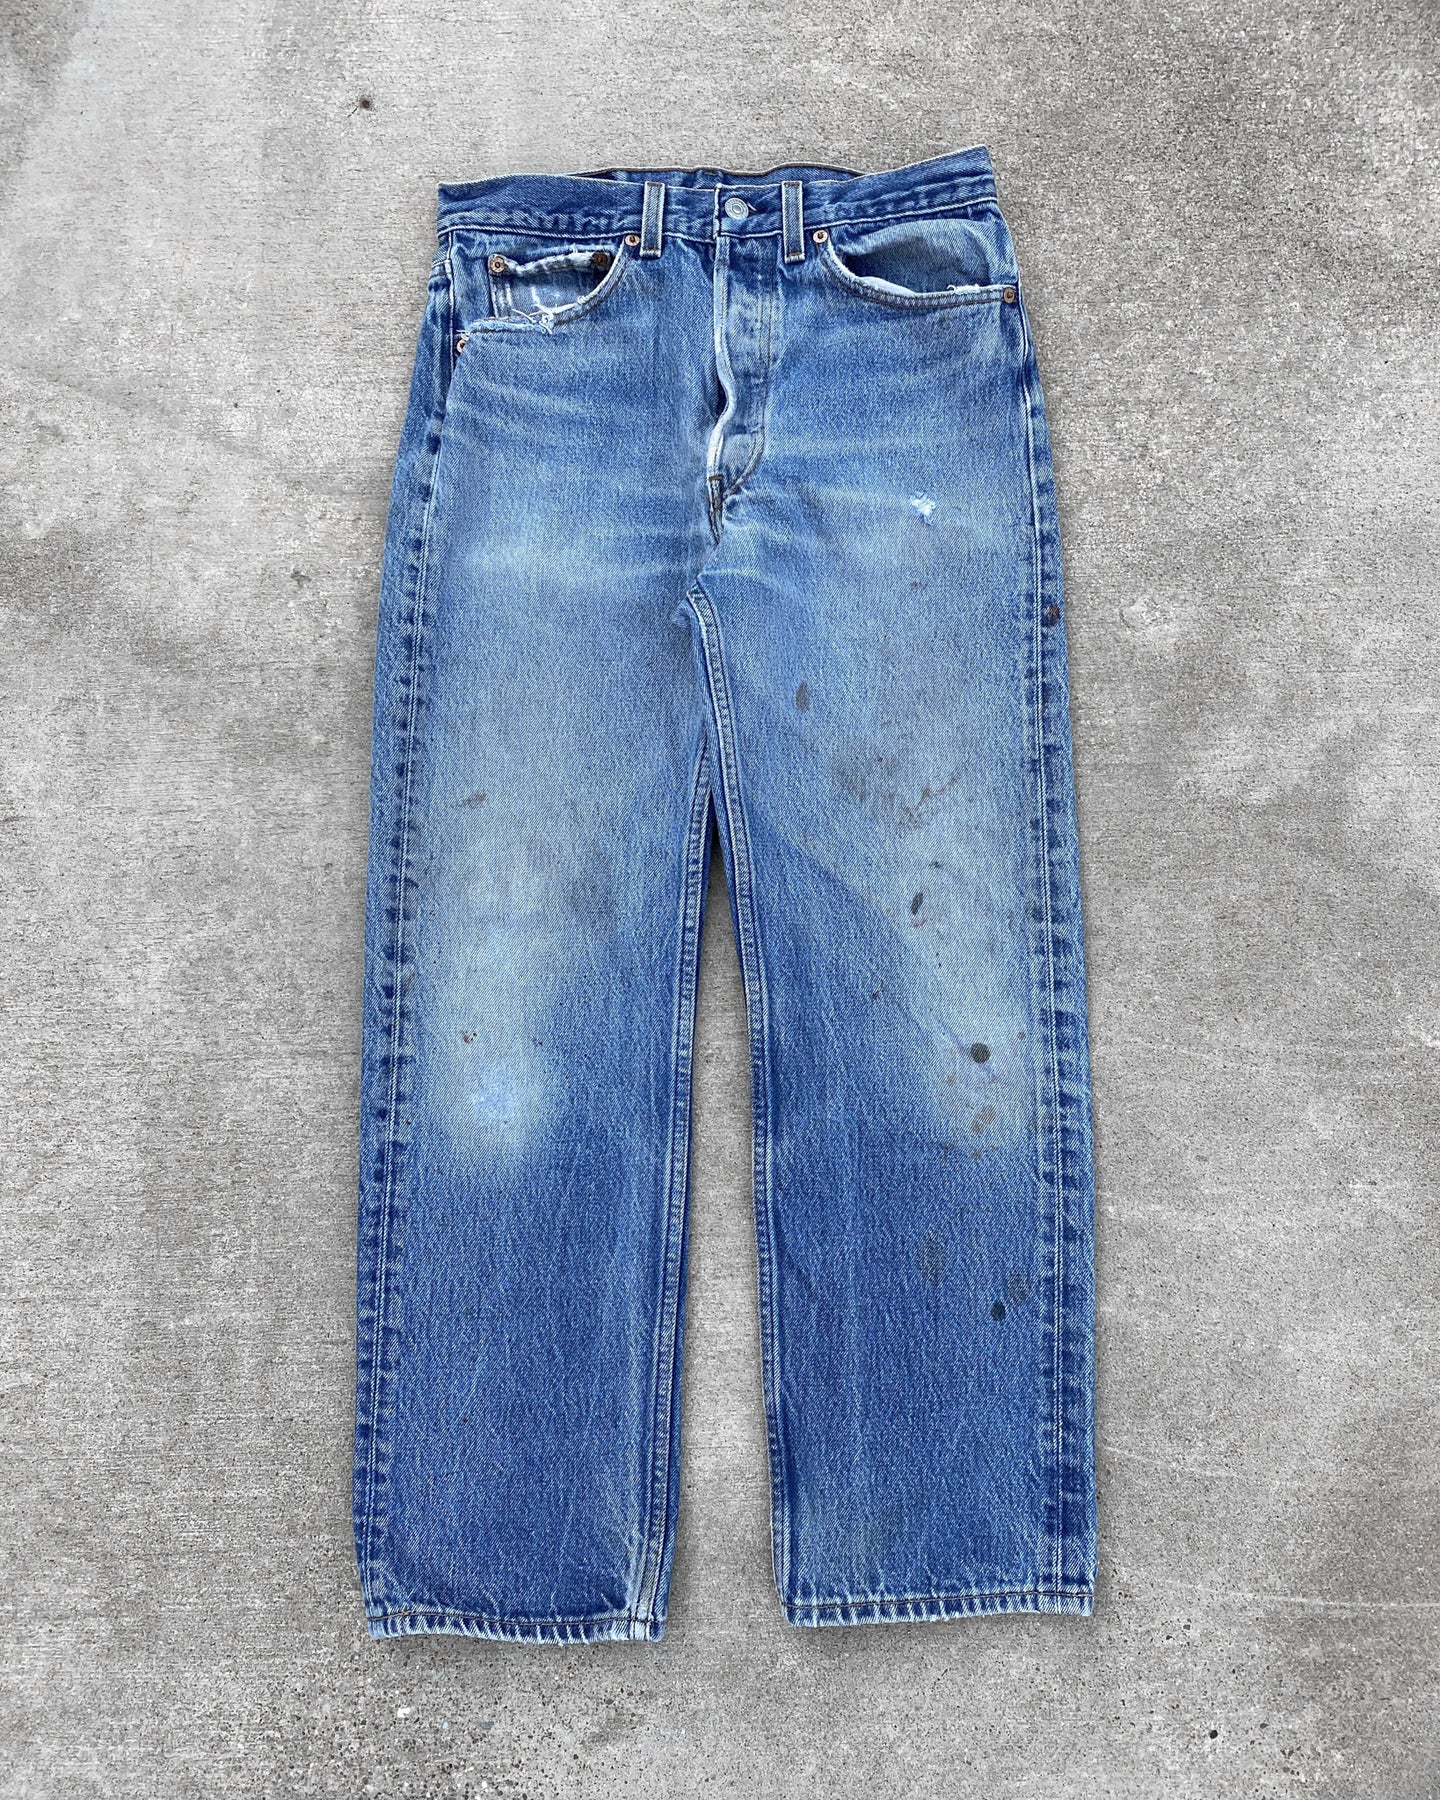 1990s Levi's Distressed and Worn 501 - Size 30 x 27